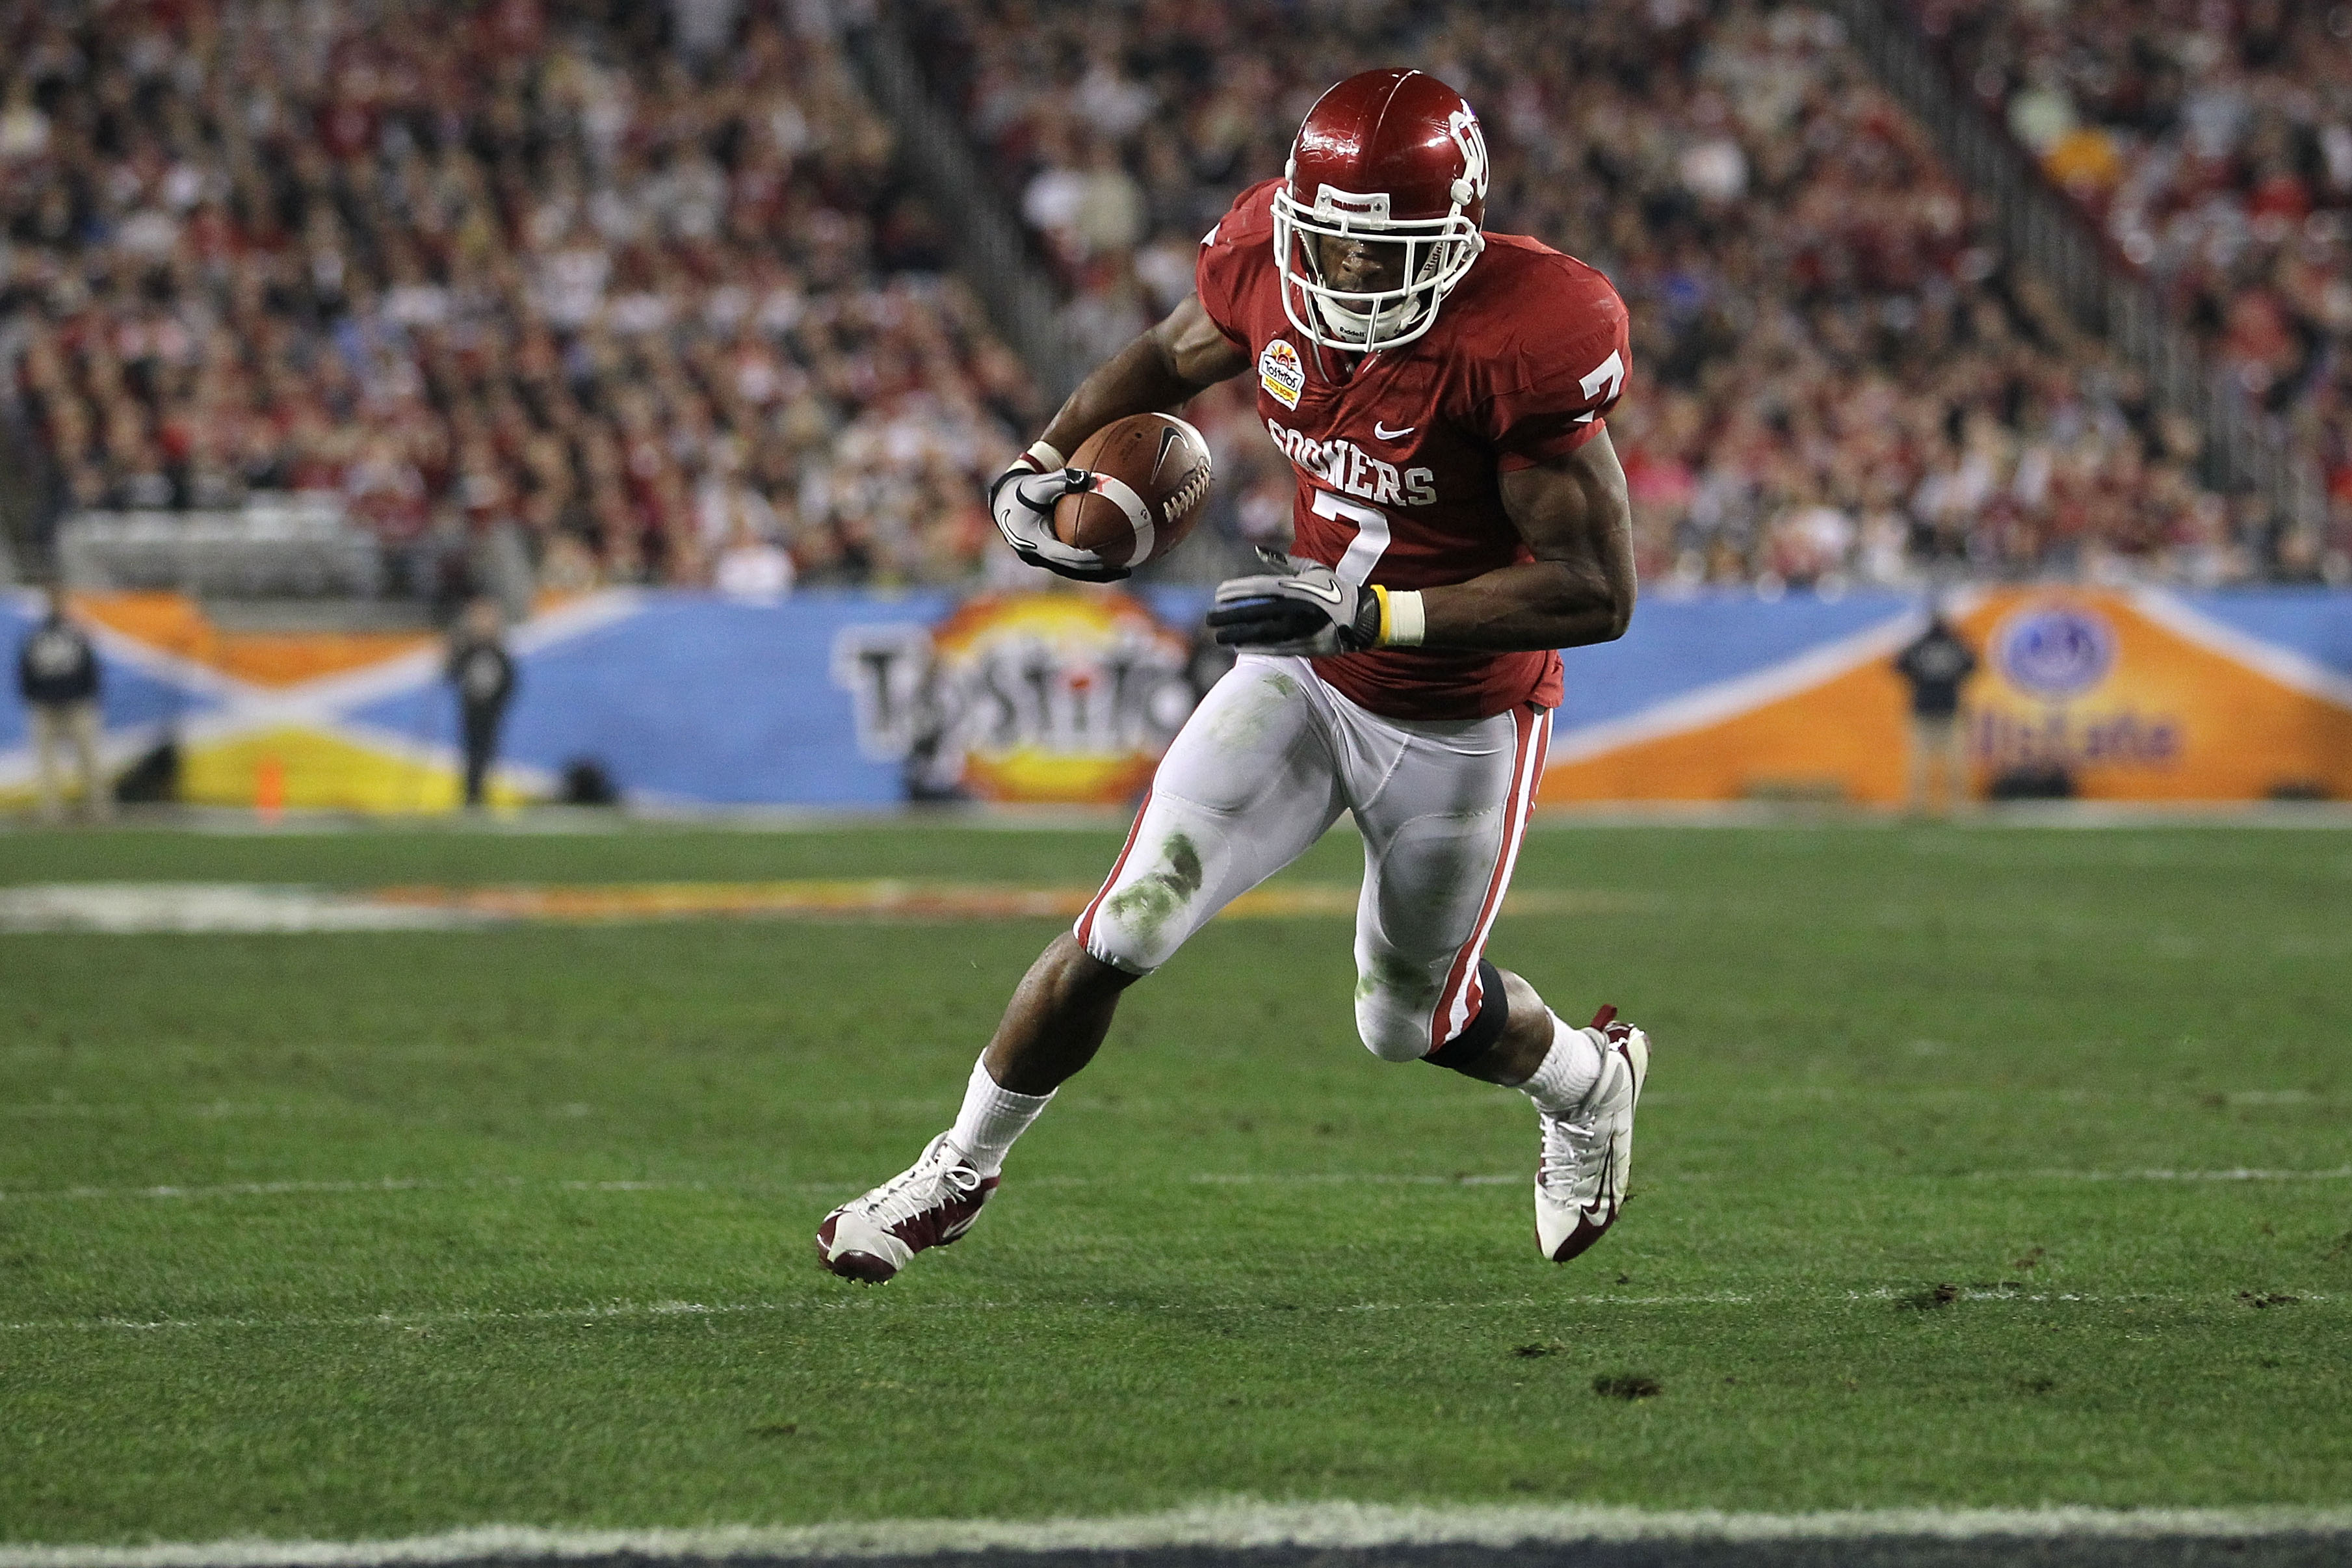 GLENDALE, AZ - JANUARY 01:  DeMarco Murray #7 of the Oklahoma Sooners runs the football to score a touchdown in the first quarter against the Connecticut Huskies during the Tostitos Fiesta Bowl at the Universtity of Phoenix Stadium on January 1, 2011 in G